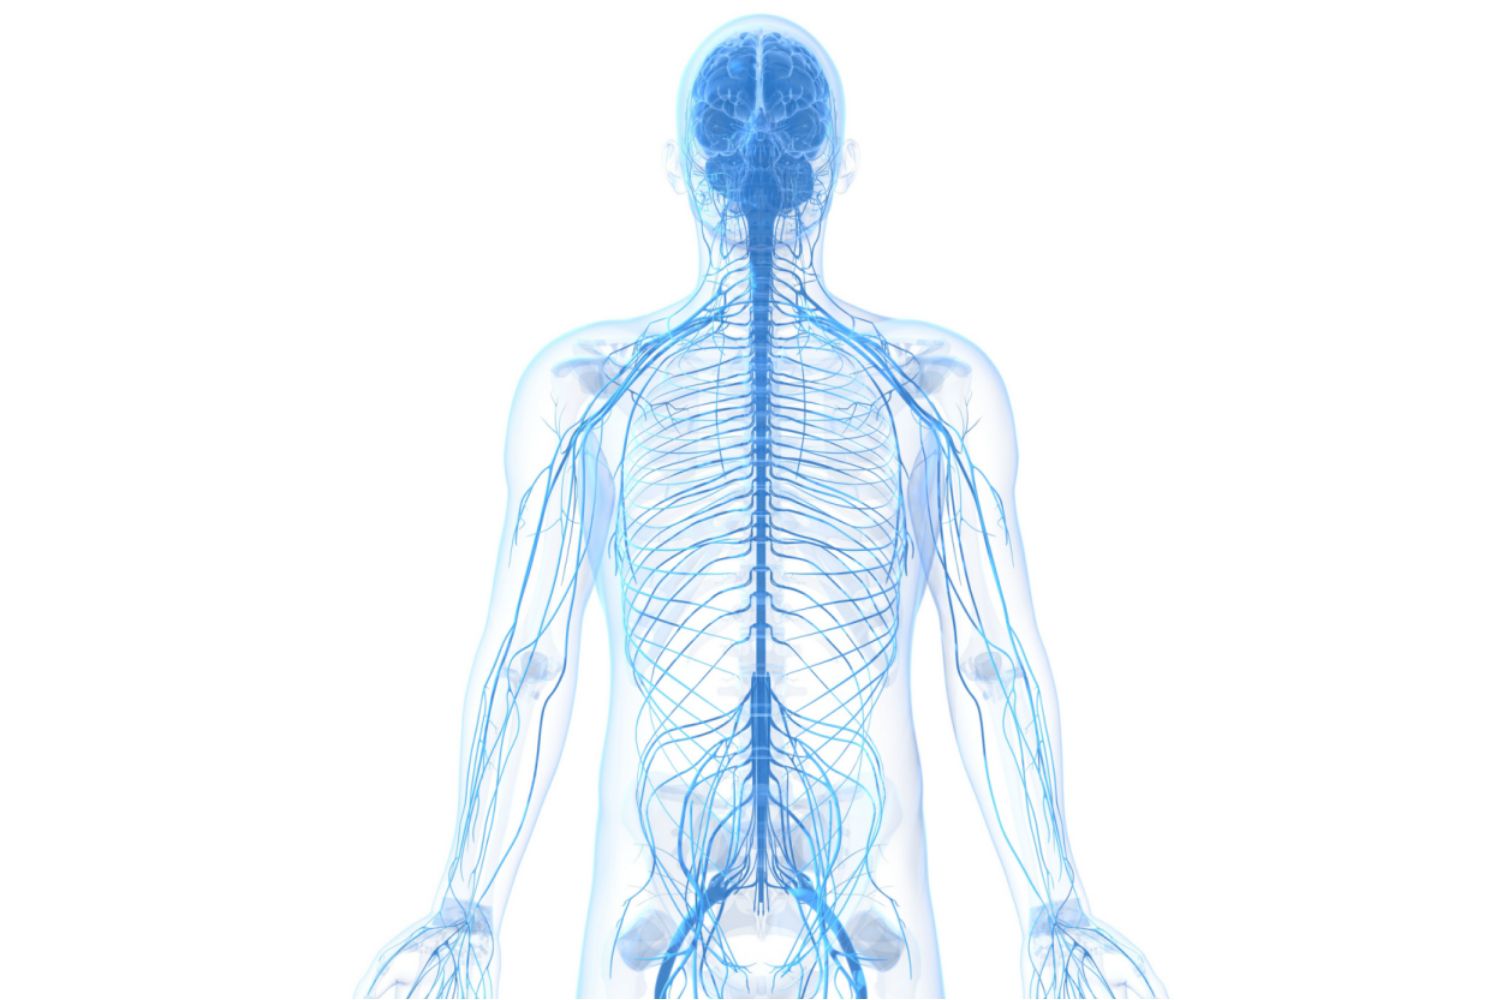 Learn About the Peripheral Nervous System